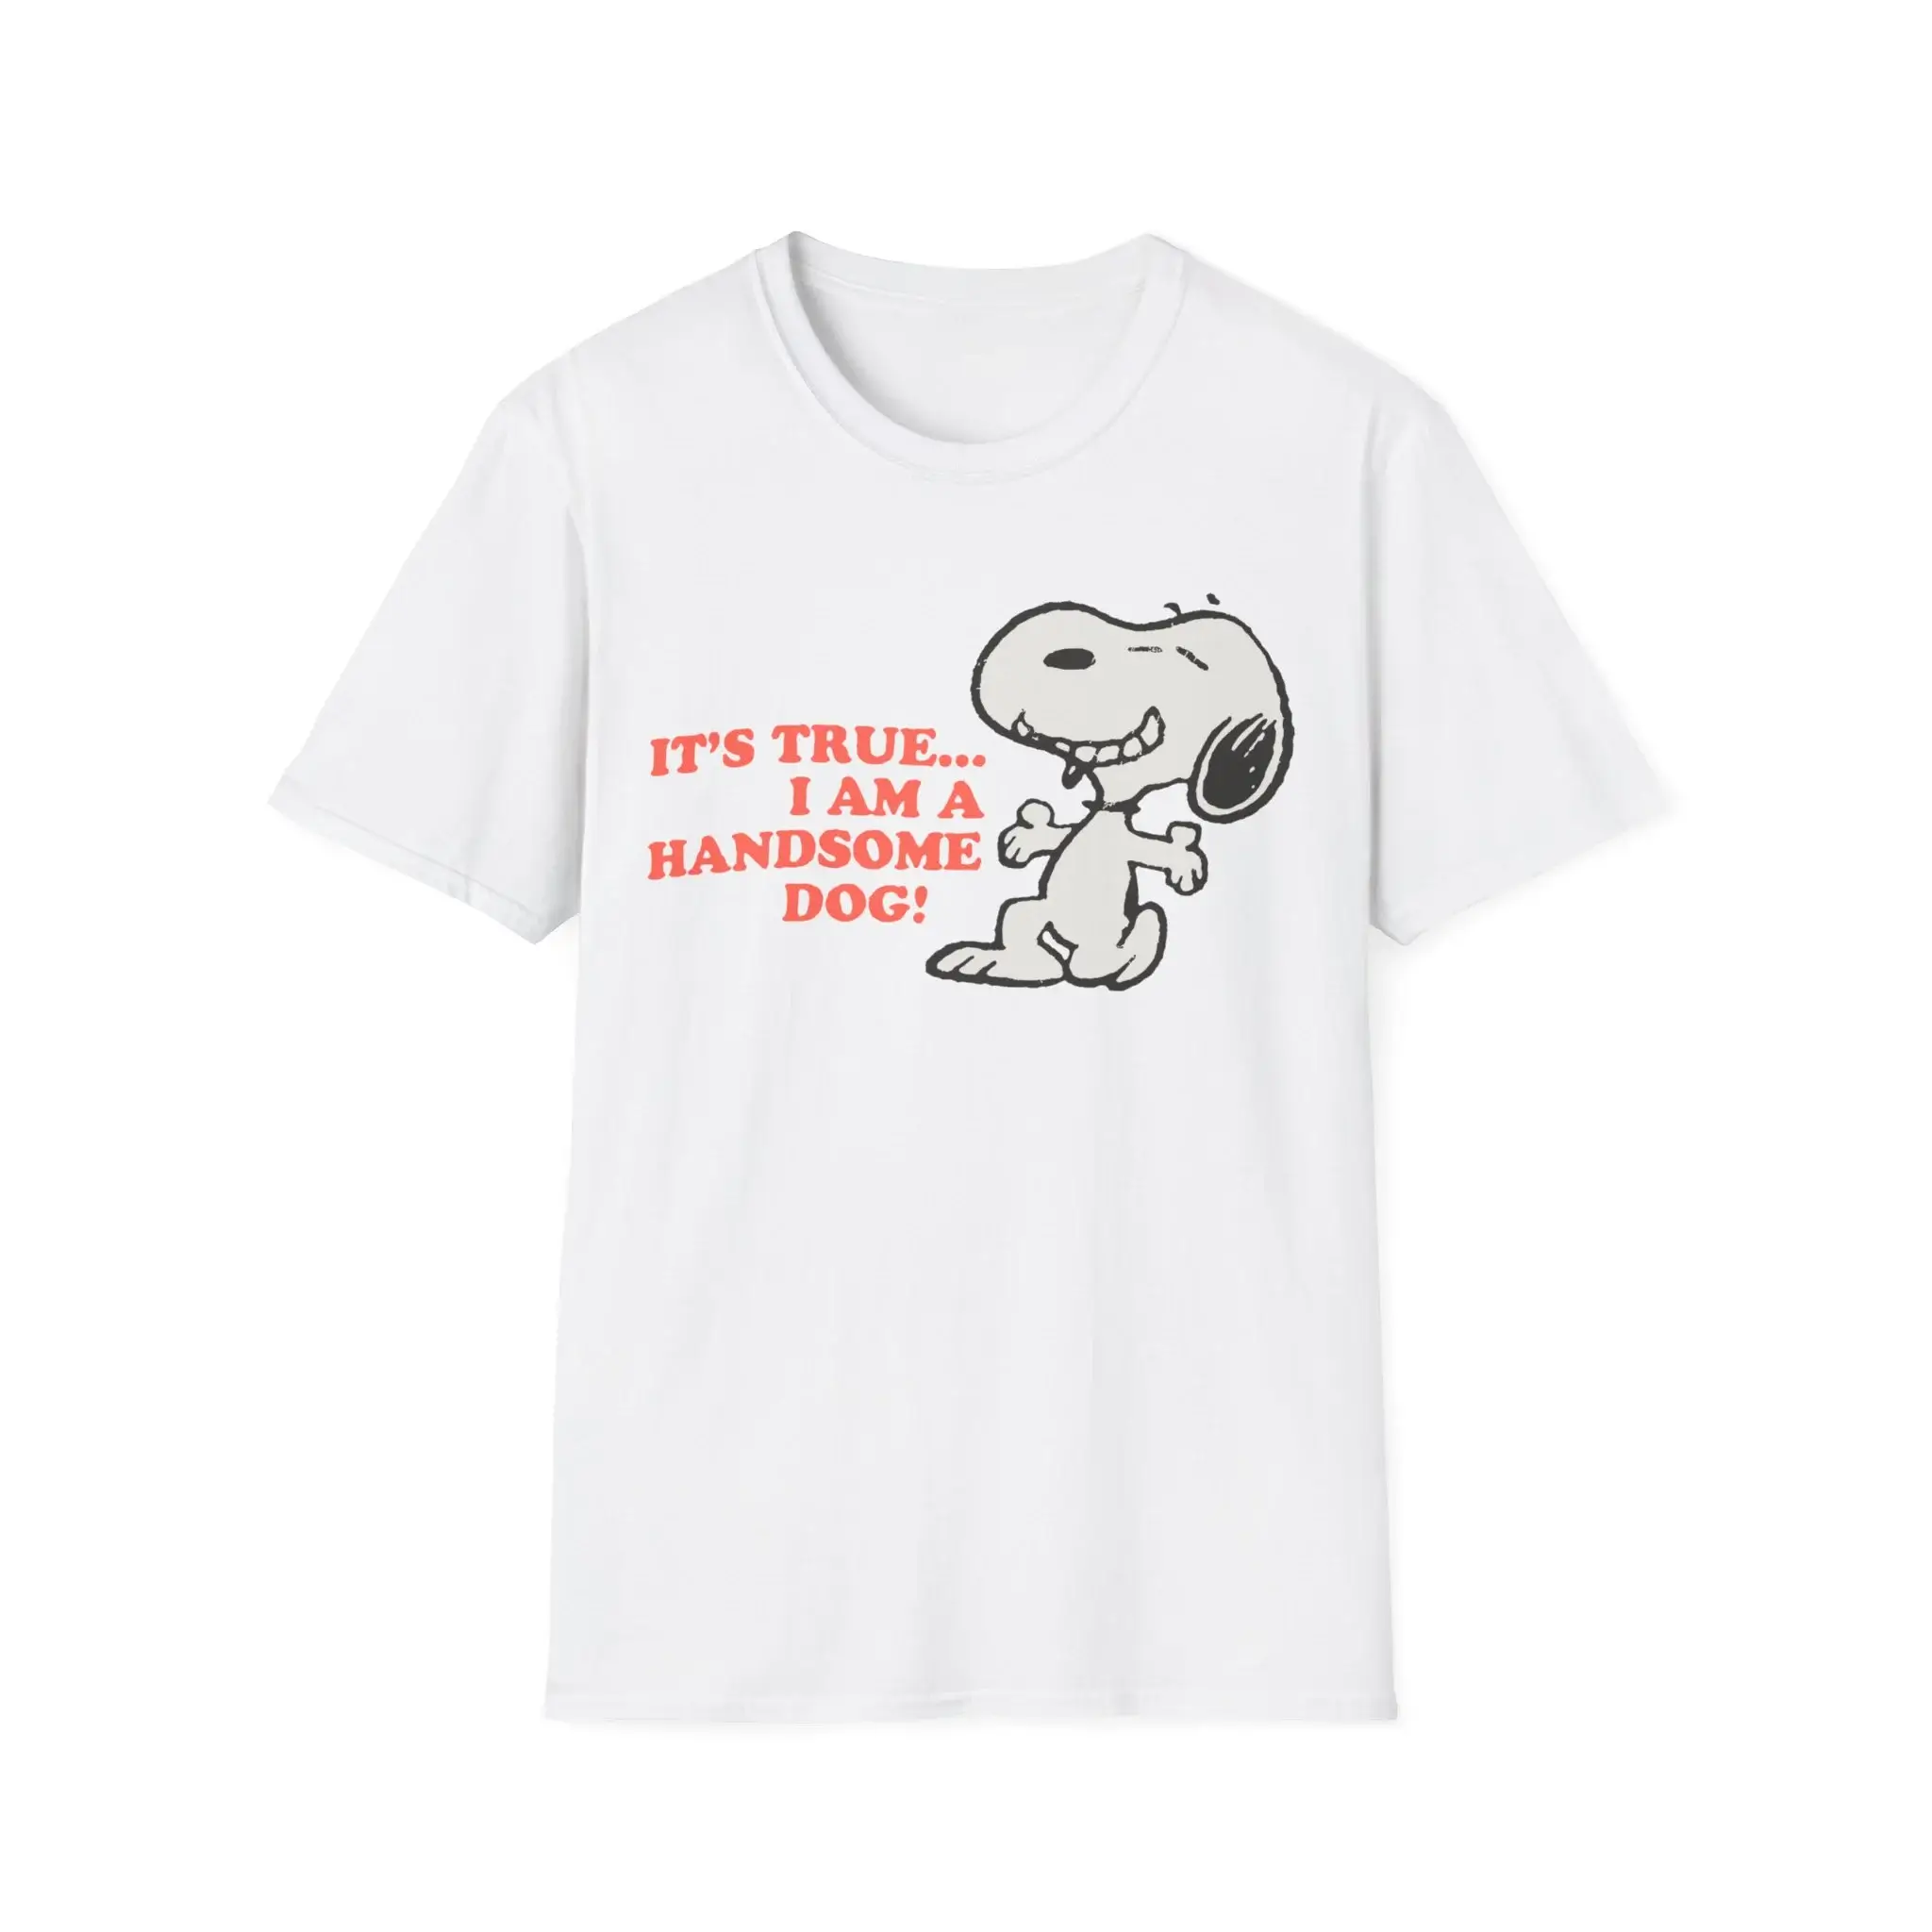 It's true I am a handsome dog Snoopy shirt